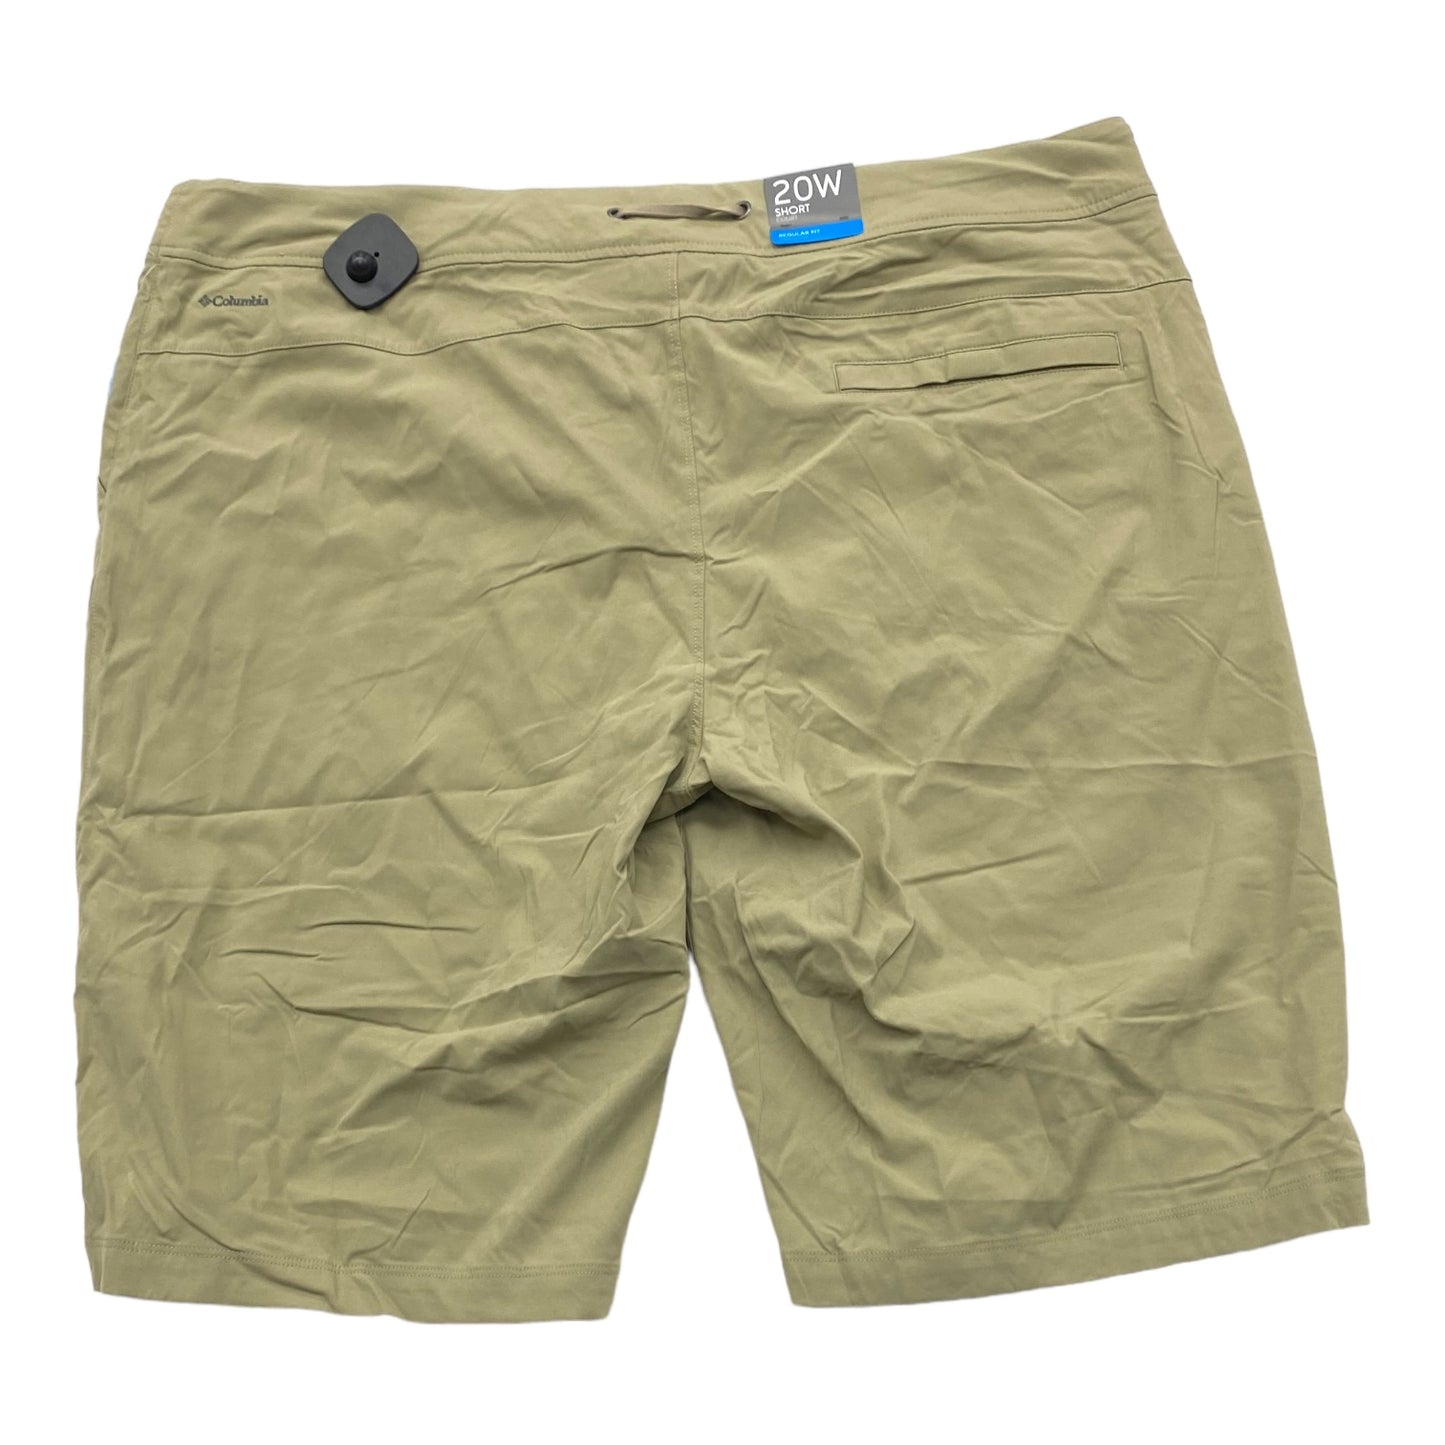 Shorts By Columbia  Size: 20w